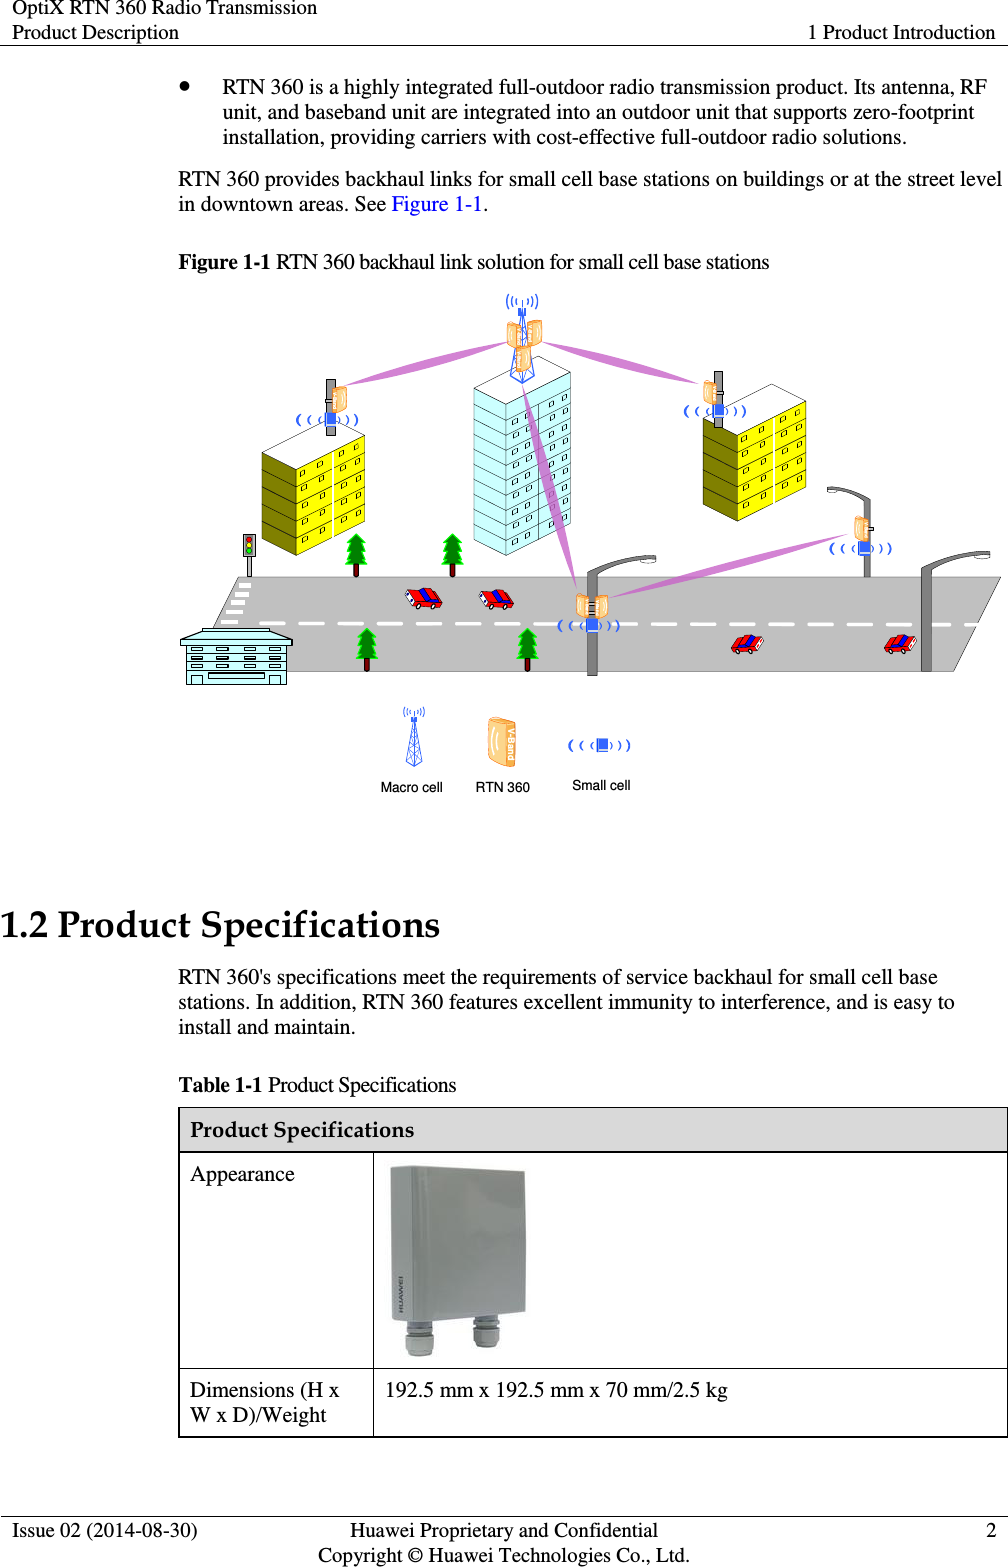 OptiX RTN 360 Radio Transmission Product Description 1 Product Introduction  Issue 02 (2014-08-30) Huawei Proprietary and Confidential                                     Copyright © Huawei Technologies Co., Ltd. 2   RTN 360 is a highly integrated full-outdoor radio transmission product. Its antenna, RF unit, and baseband unit are integrated into an outdoor unit that supports zero-footprint installation, providing carriers with cost-effective full-outdoor radio solutions. RTN 360 provides backhaul links for small cell base stations on buildings or at the street level in downtown areas. See Figure 1-1. Figure 1-1 RTN 360 backhaul link solution for small cell base stations        V-BandV-BandV-BandV-BandV-Band V-BandMacro cell RTN 360 Small cellV-Band     V-BandV-Band  1.2 Product Specifications RTN 360&apos;s specifications meet the requirements of service backhaul for small cell base stations. In addition, RTN 360 features excellent immunity to interference, and is easy to install and maintain. Table 1-1 Product Specifications Product Specifications Appearance  Dimensions (H x W x D)/Weight 192.5 mm x 192.5 mm x 70 mm/2.5 kg 